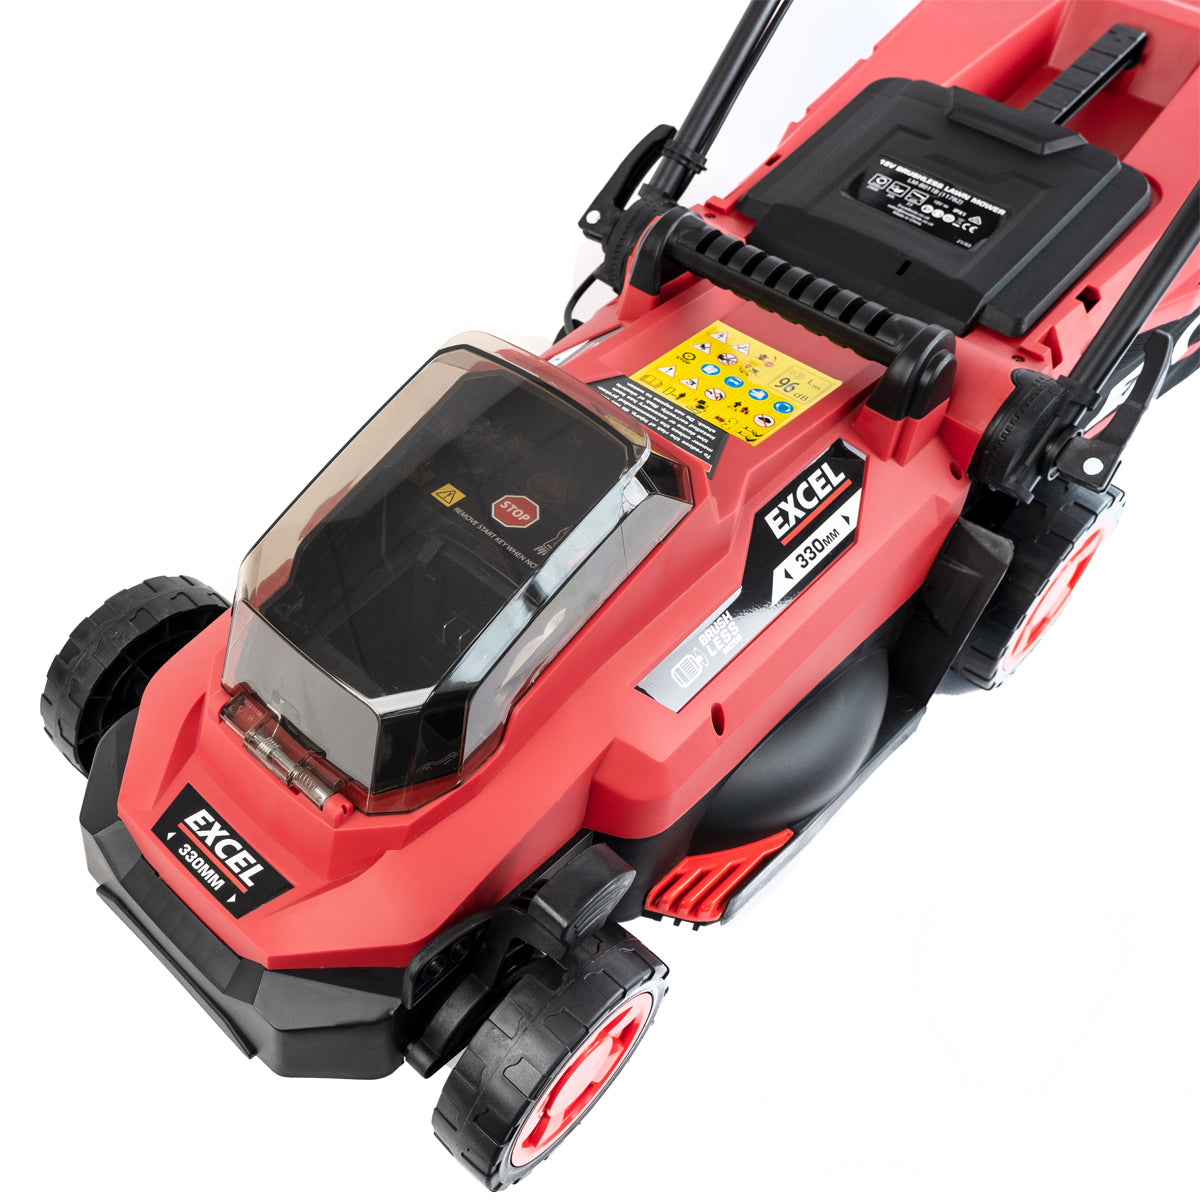 Excel 18V 330mm Brushless Lawn Mower 5 Adjustable Height (Battery & Charger Not Included)